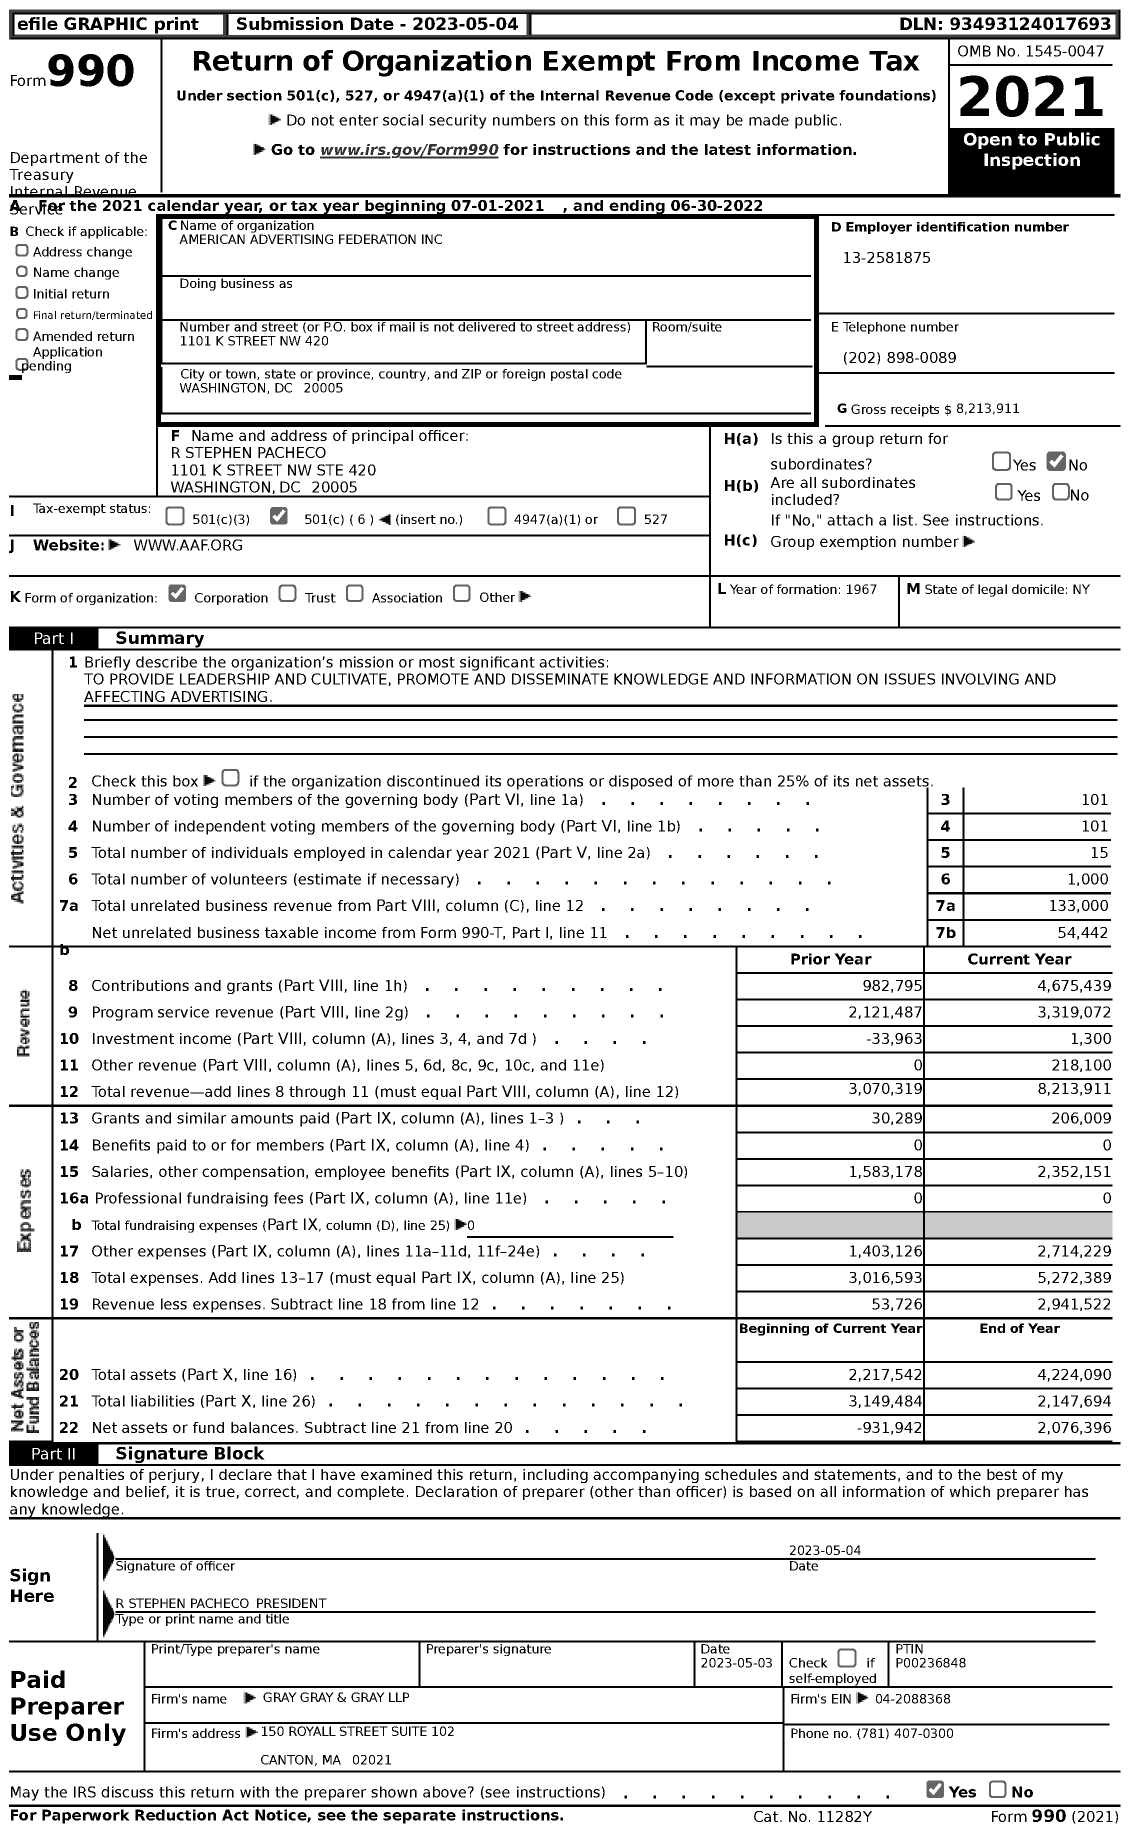 Image of first page of 2021 Form 990 for American Advertising Federation (AAF)